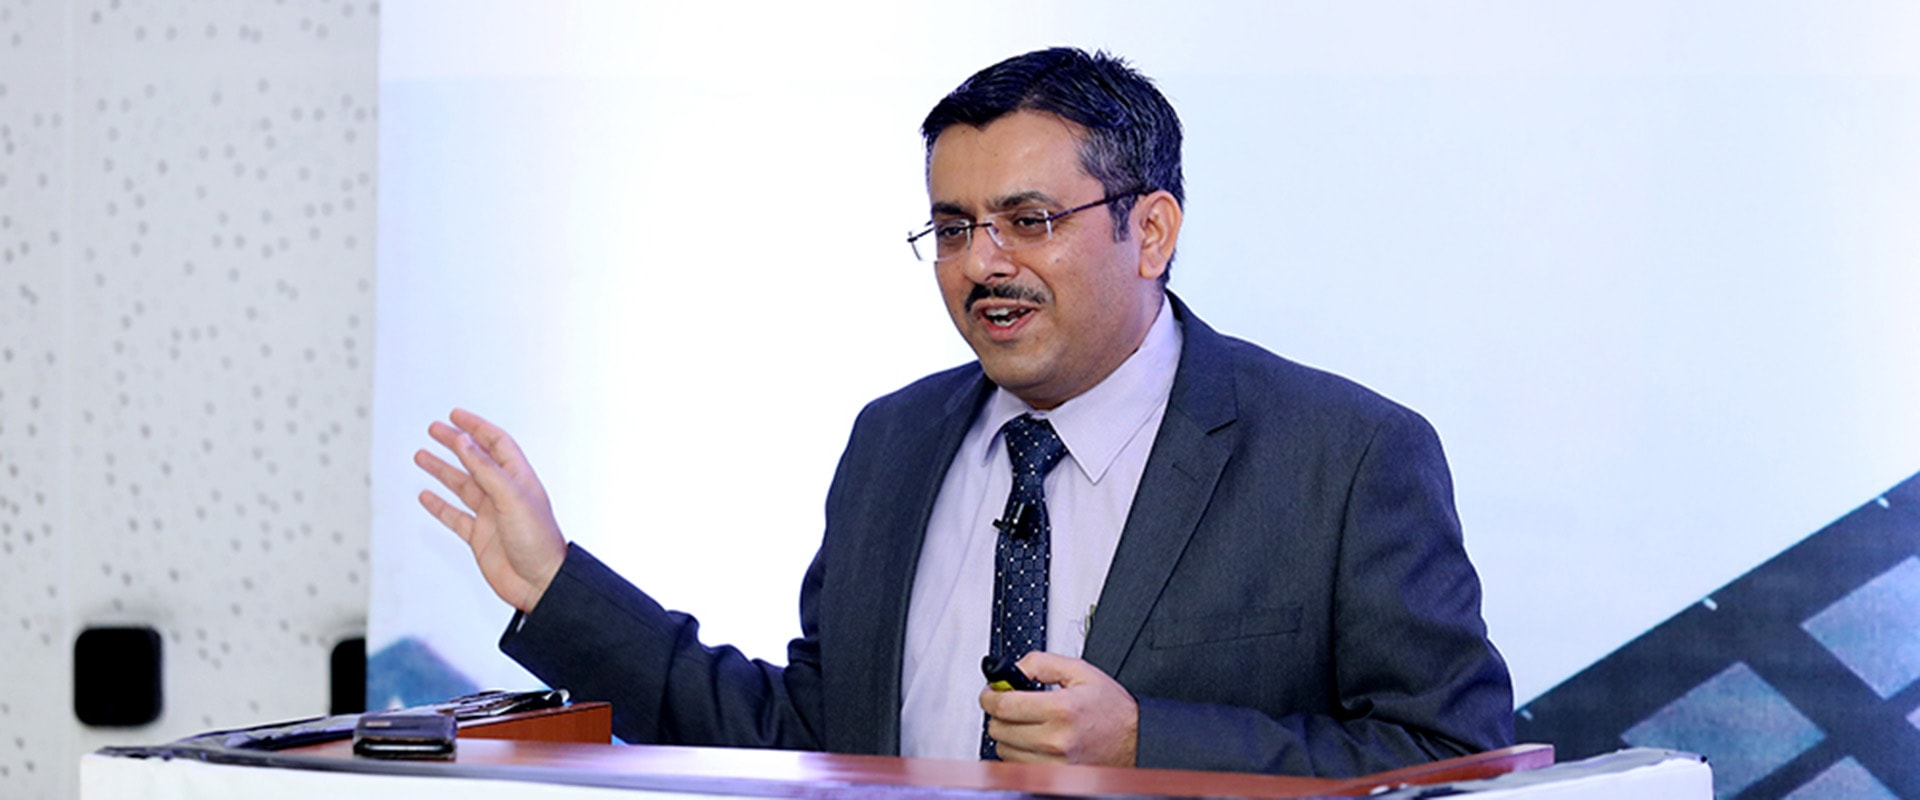 Sudhir Madhugiri, Executive Partner, Gartner Limited, at the panel on ‘Future of Boards: The Emerging Challenges of Corporate Governance’, hosted by the Centre for Corporate Governance and Citizenship (CCGC) at IIMB, on June 15, 2019.